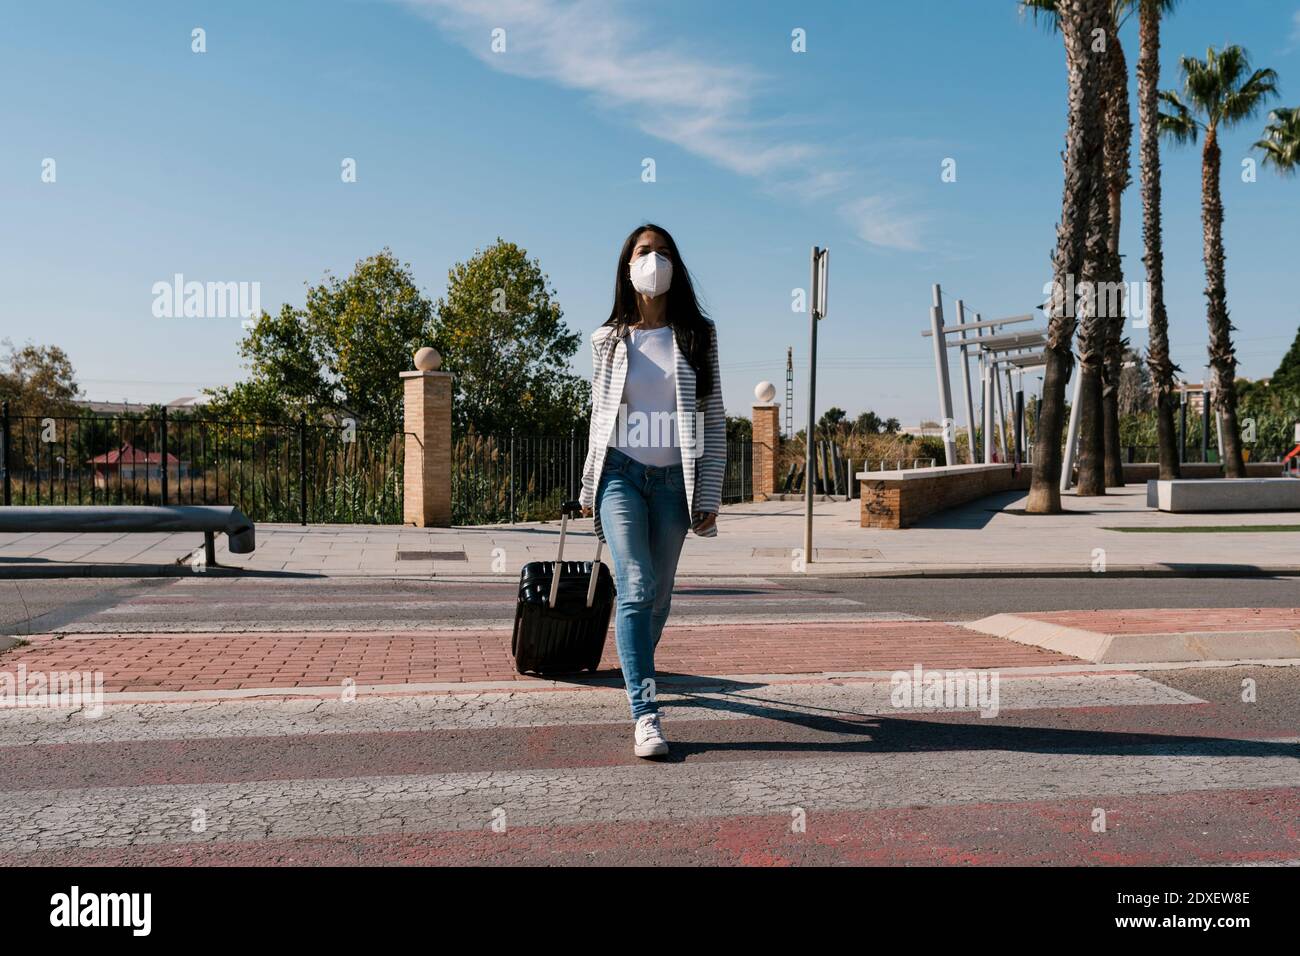 Woman with luggage crossing street against blue sky on sunny day during pandemic Stock Photo